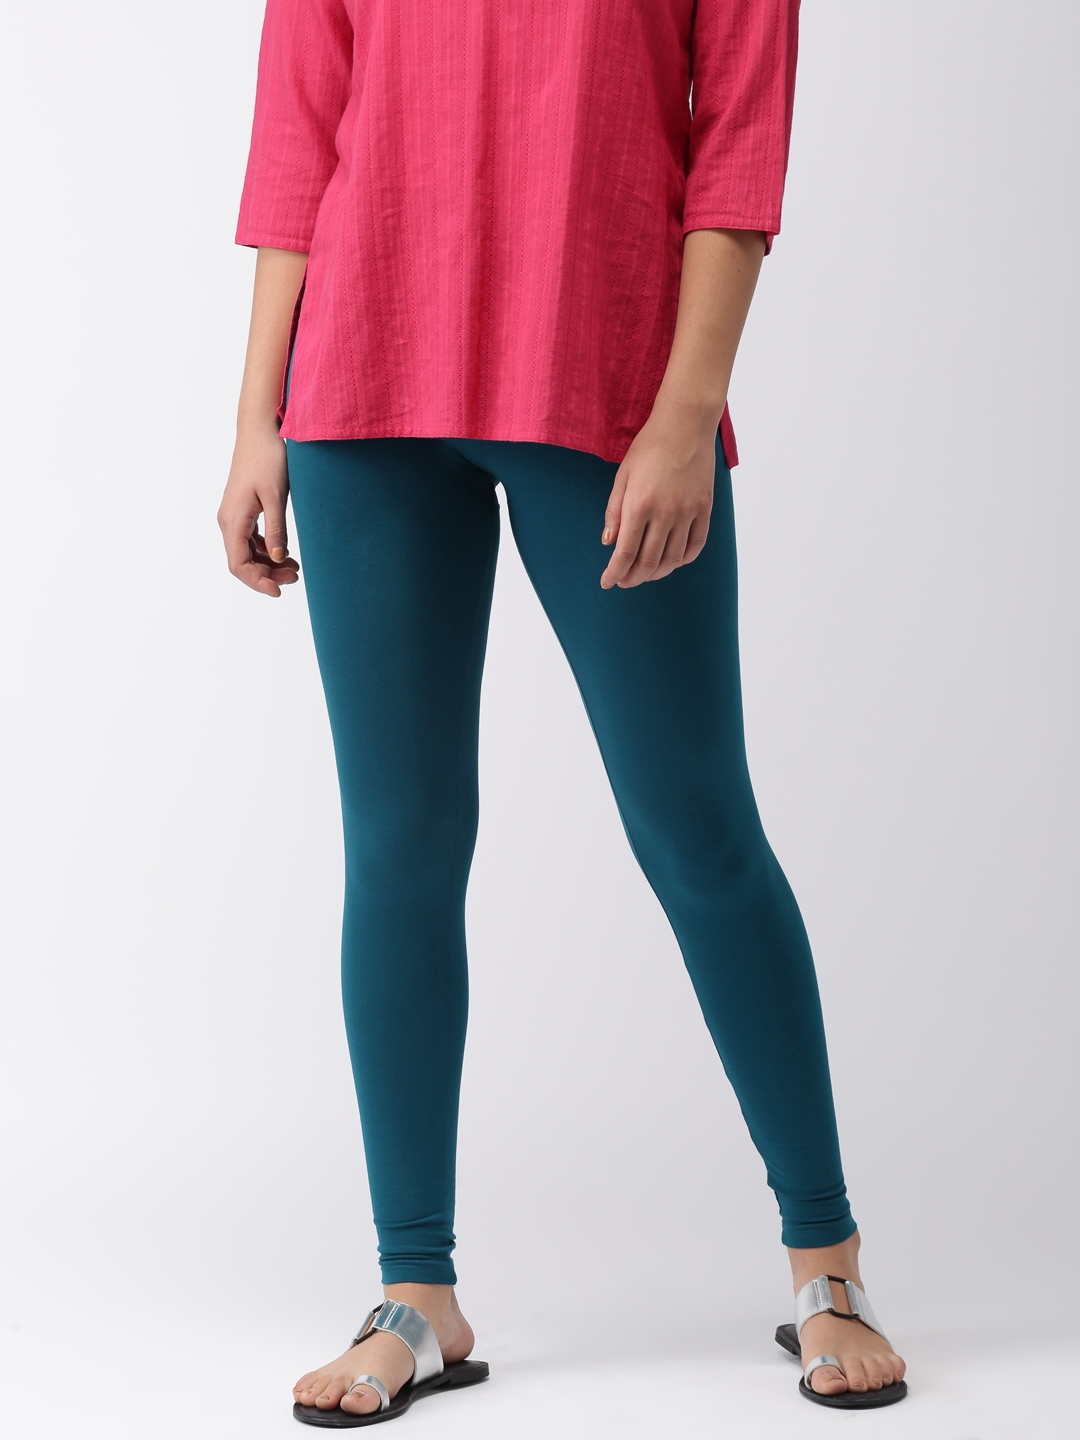 Go Colors Ethnic Bottoms : Go Colors Rose Leggings Online | Nykaa Fashion-suu.vn